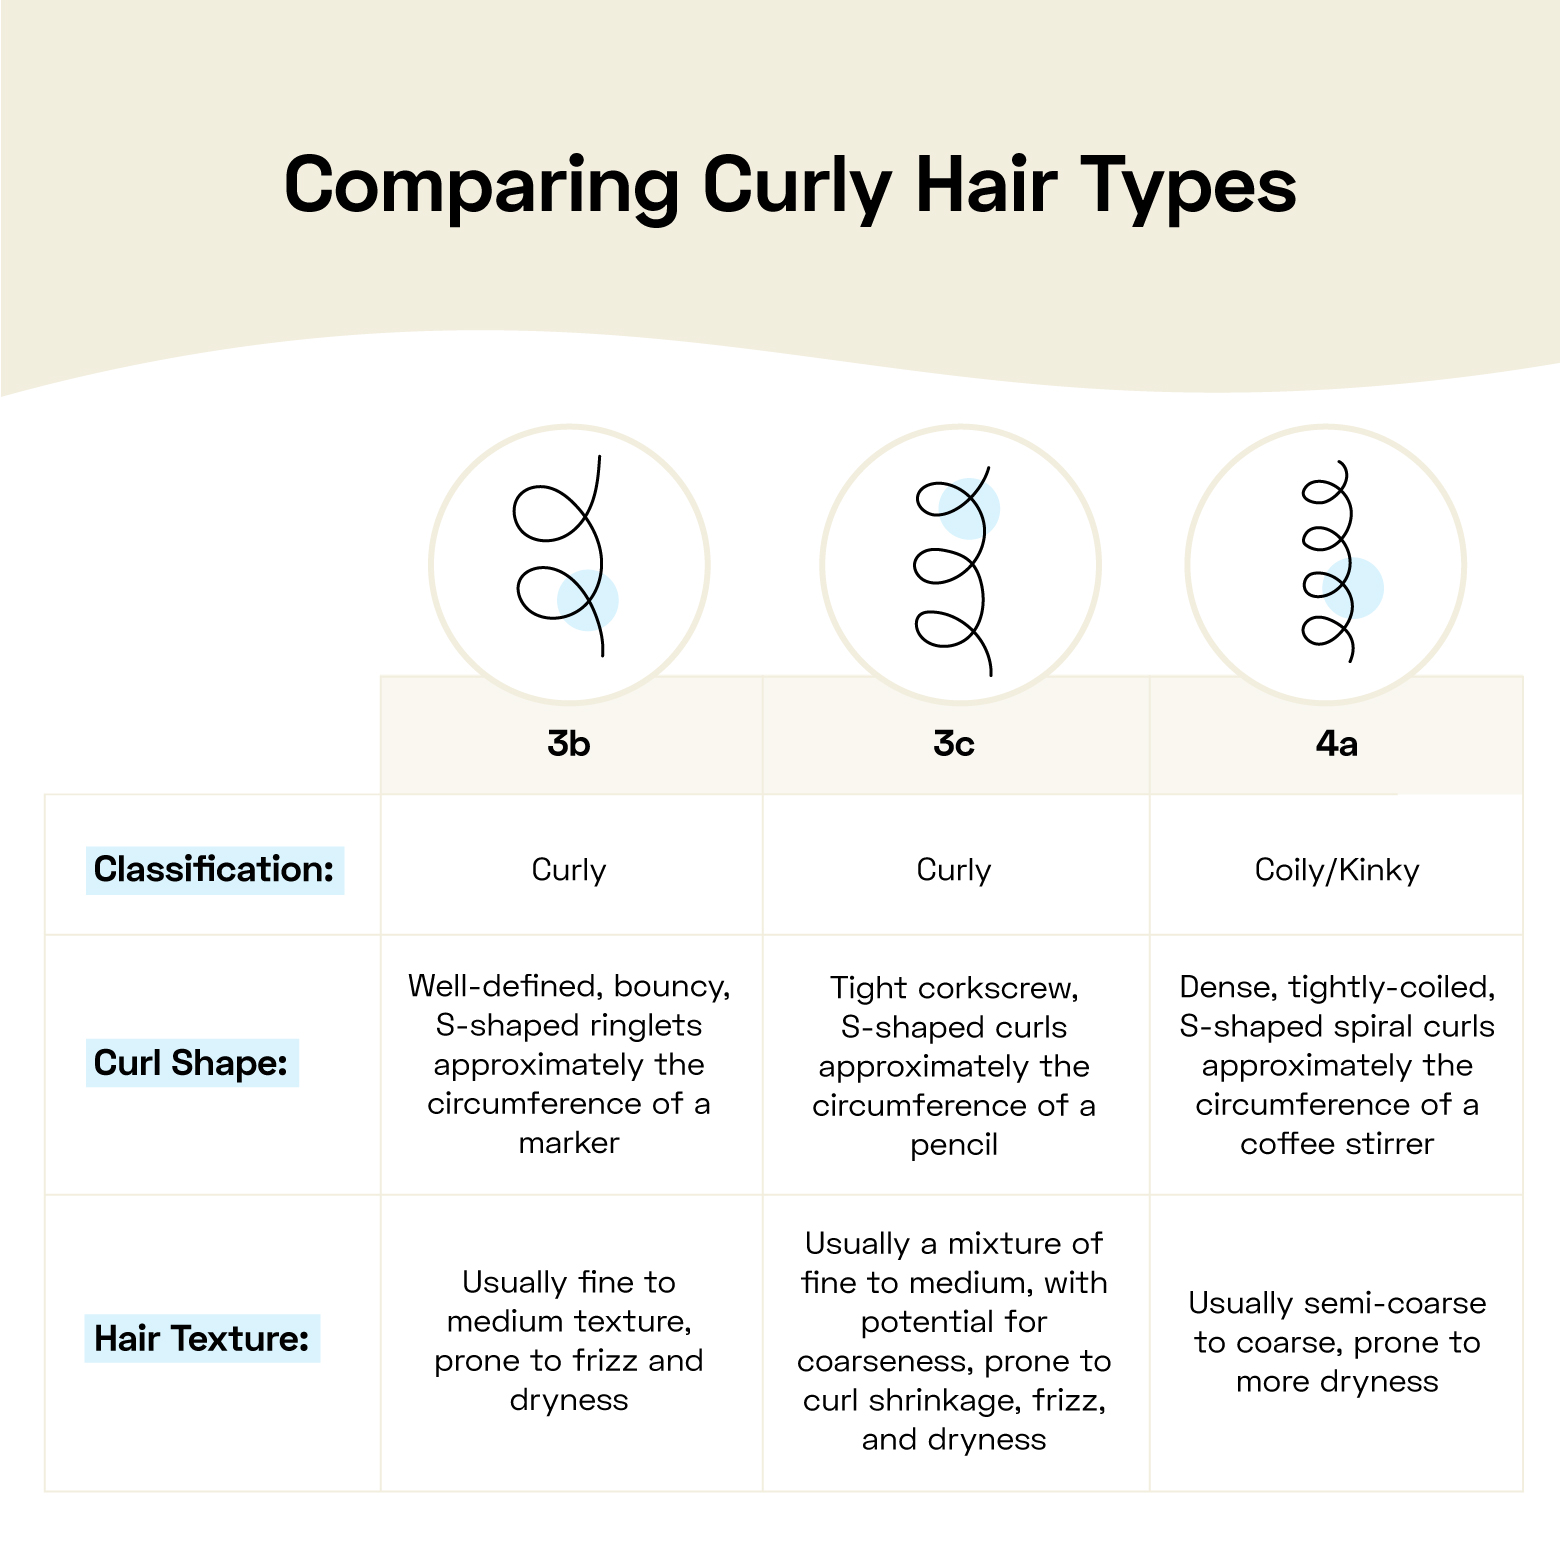 Comparing types of curly hair